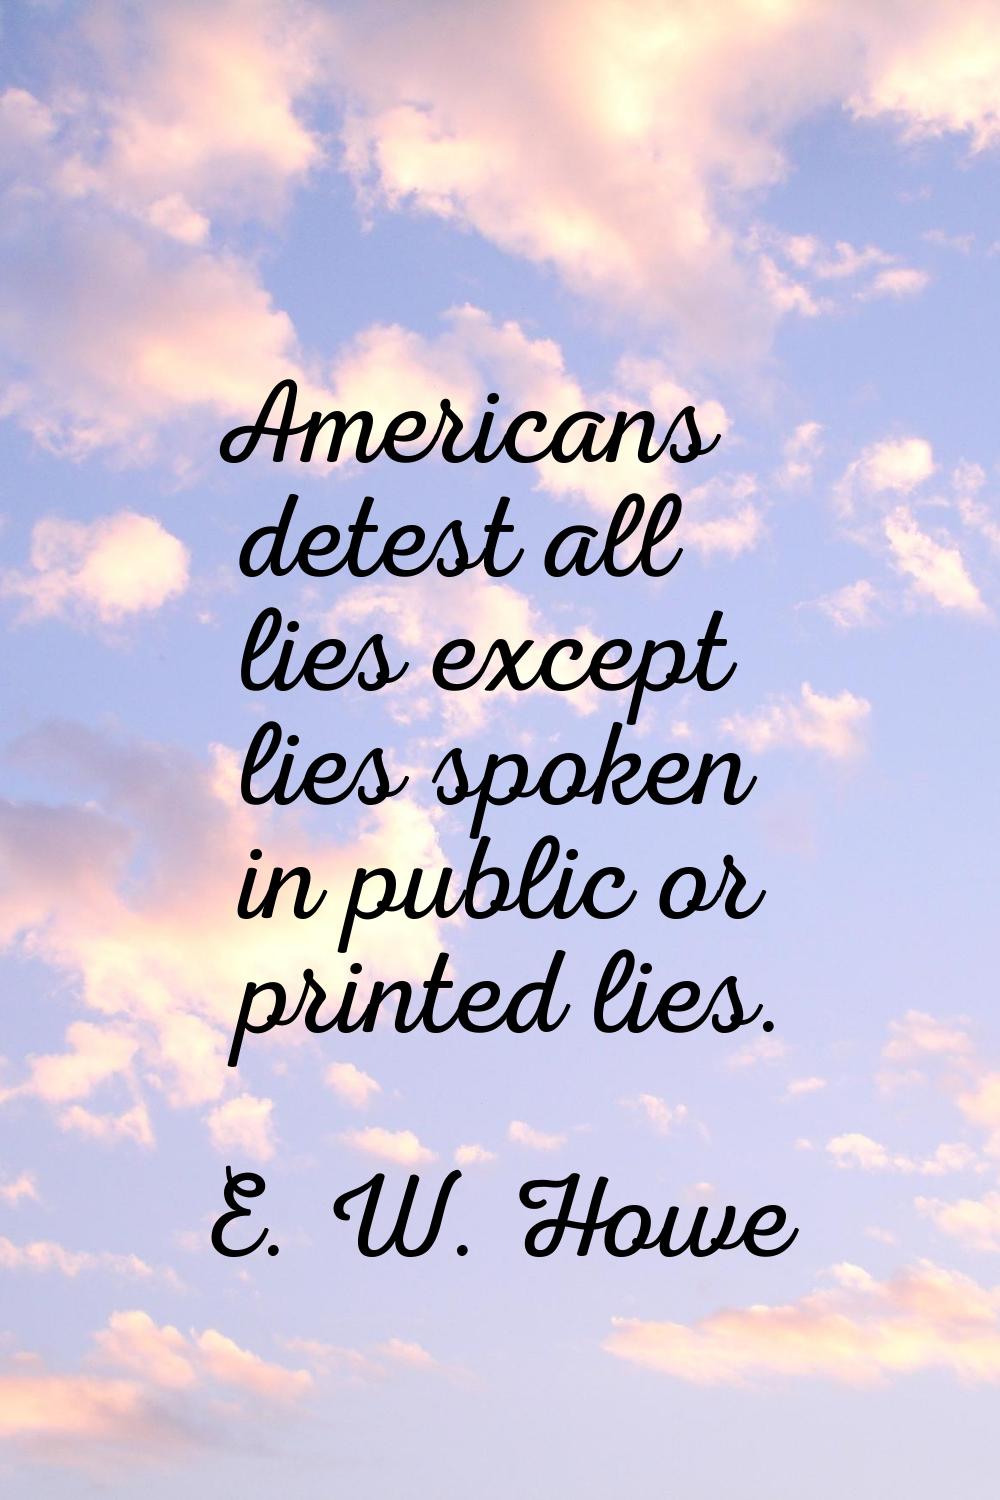 Americans detest all lies except lies spoken in public or printed lies.